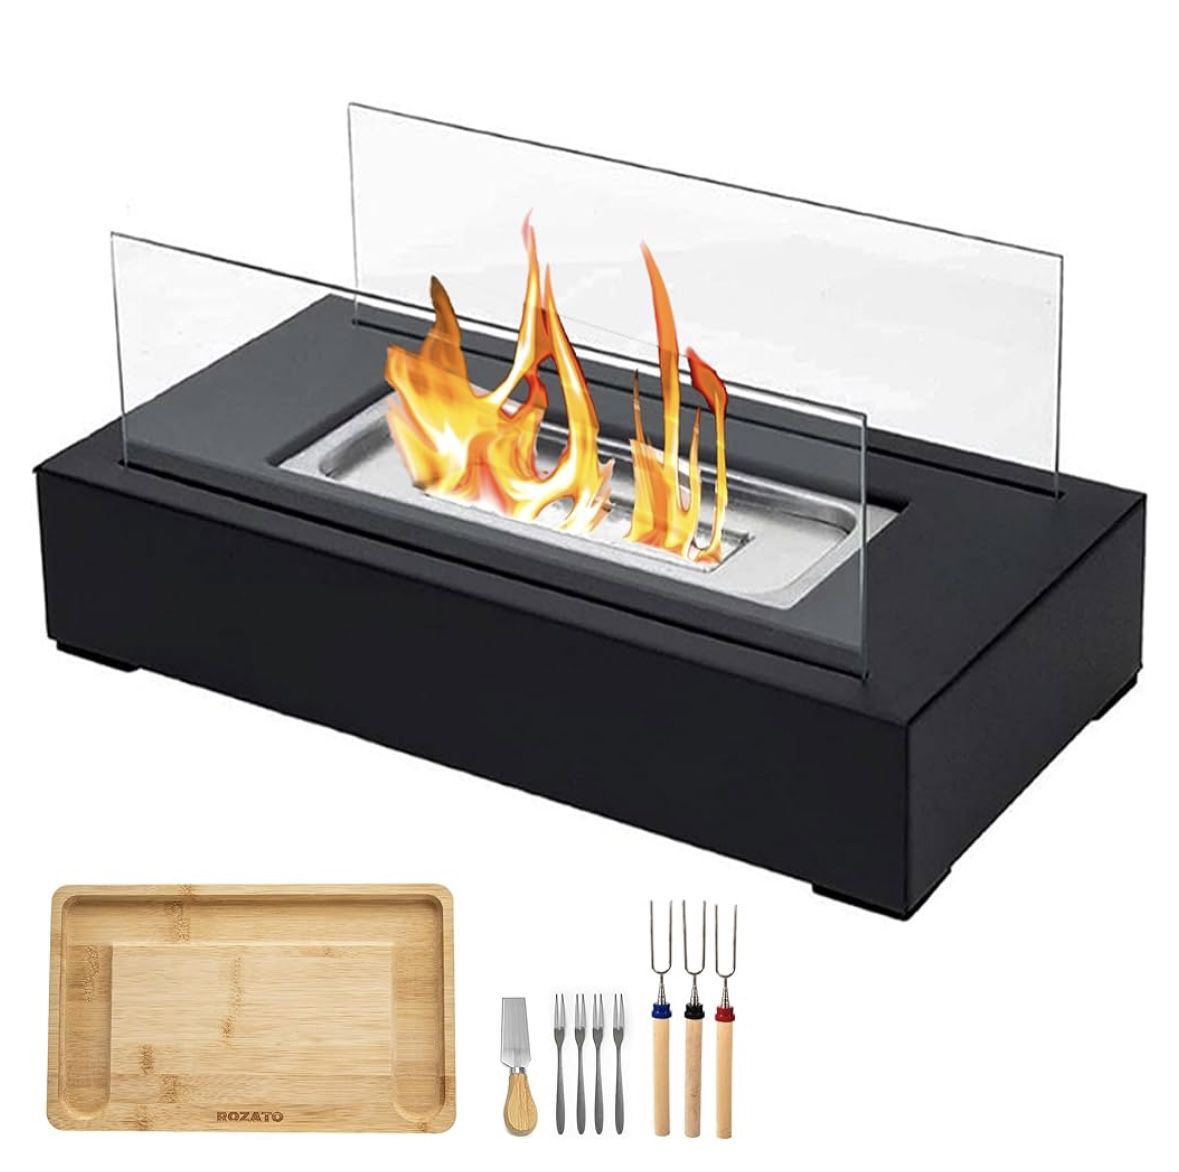 Tabletop Fire Pit with Smores Maker Kit Portable Indoor/Outdoor Mini Small Fireplace Table Top